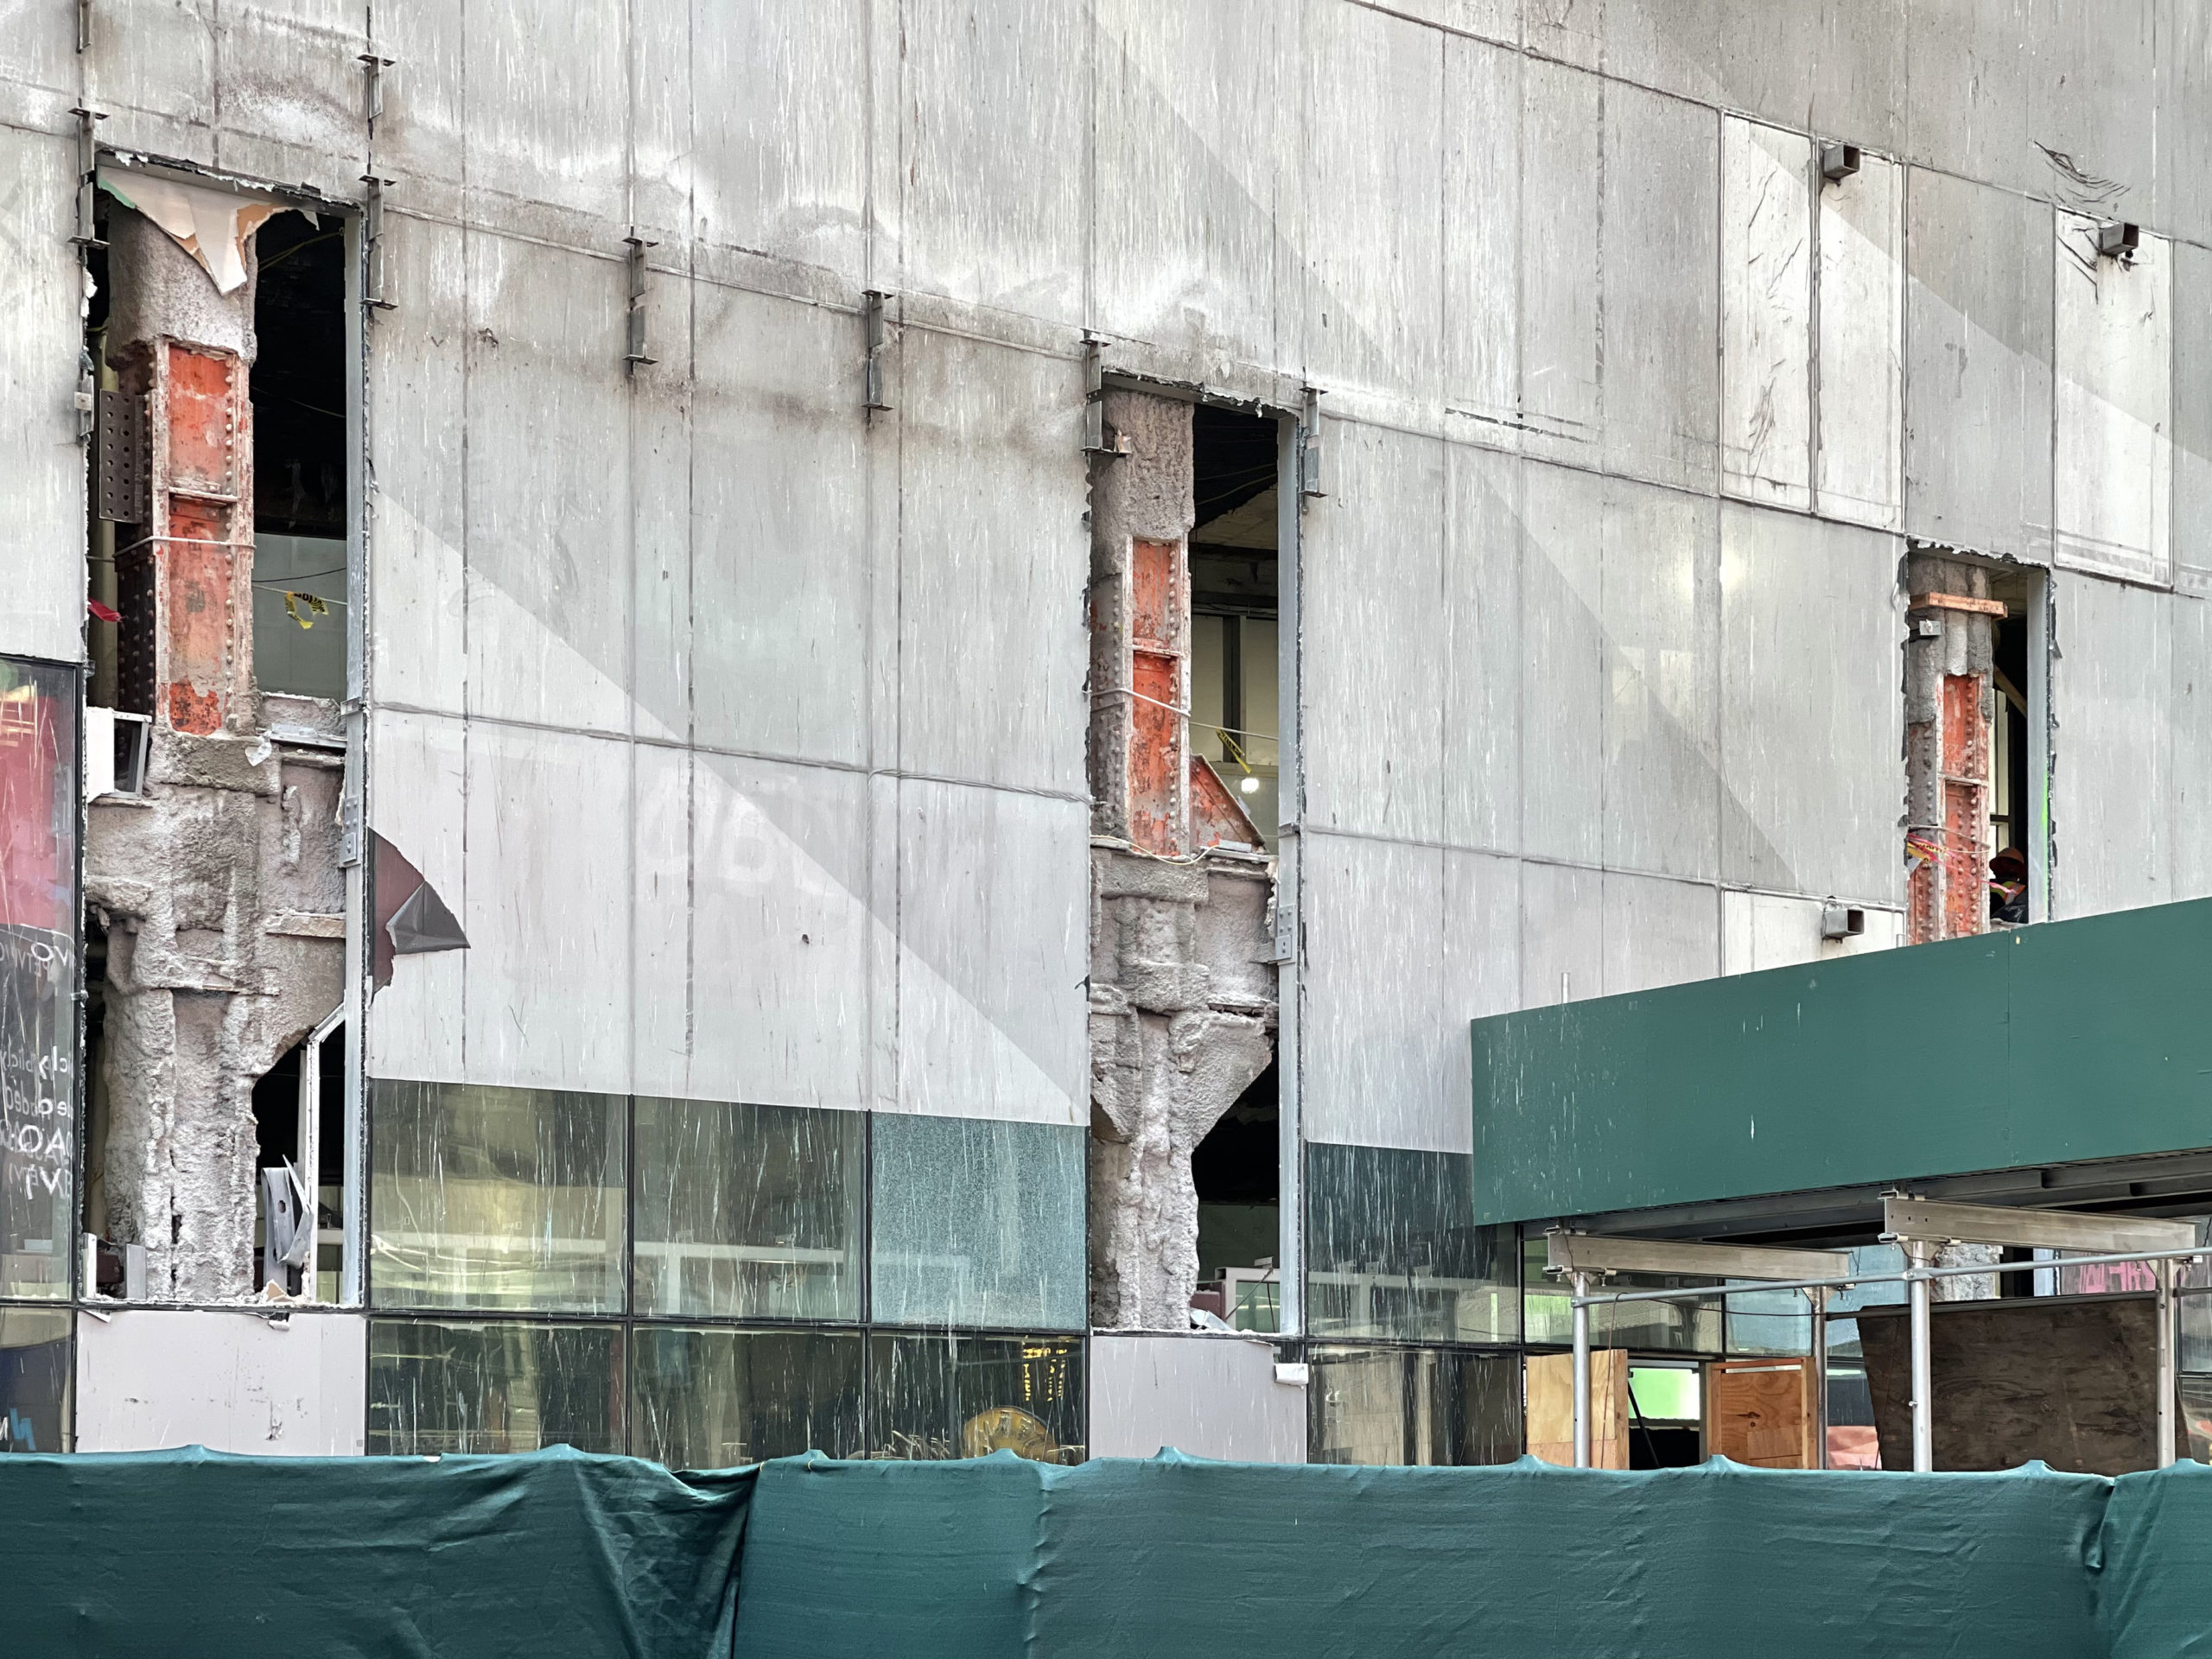 Billboard Removal and Transformation of One Times Square Progresses in  Midtown, Manhattan - New York YIMBY